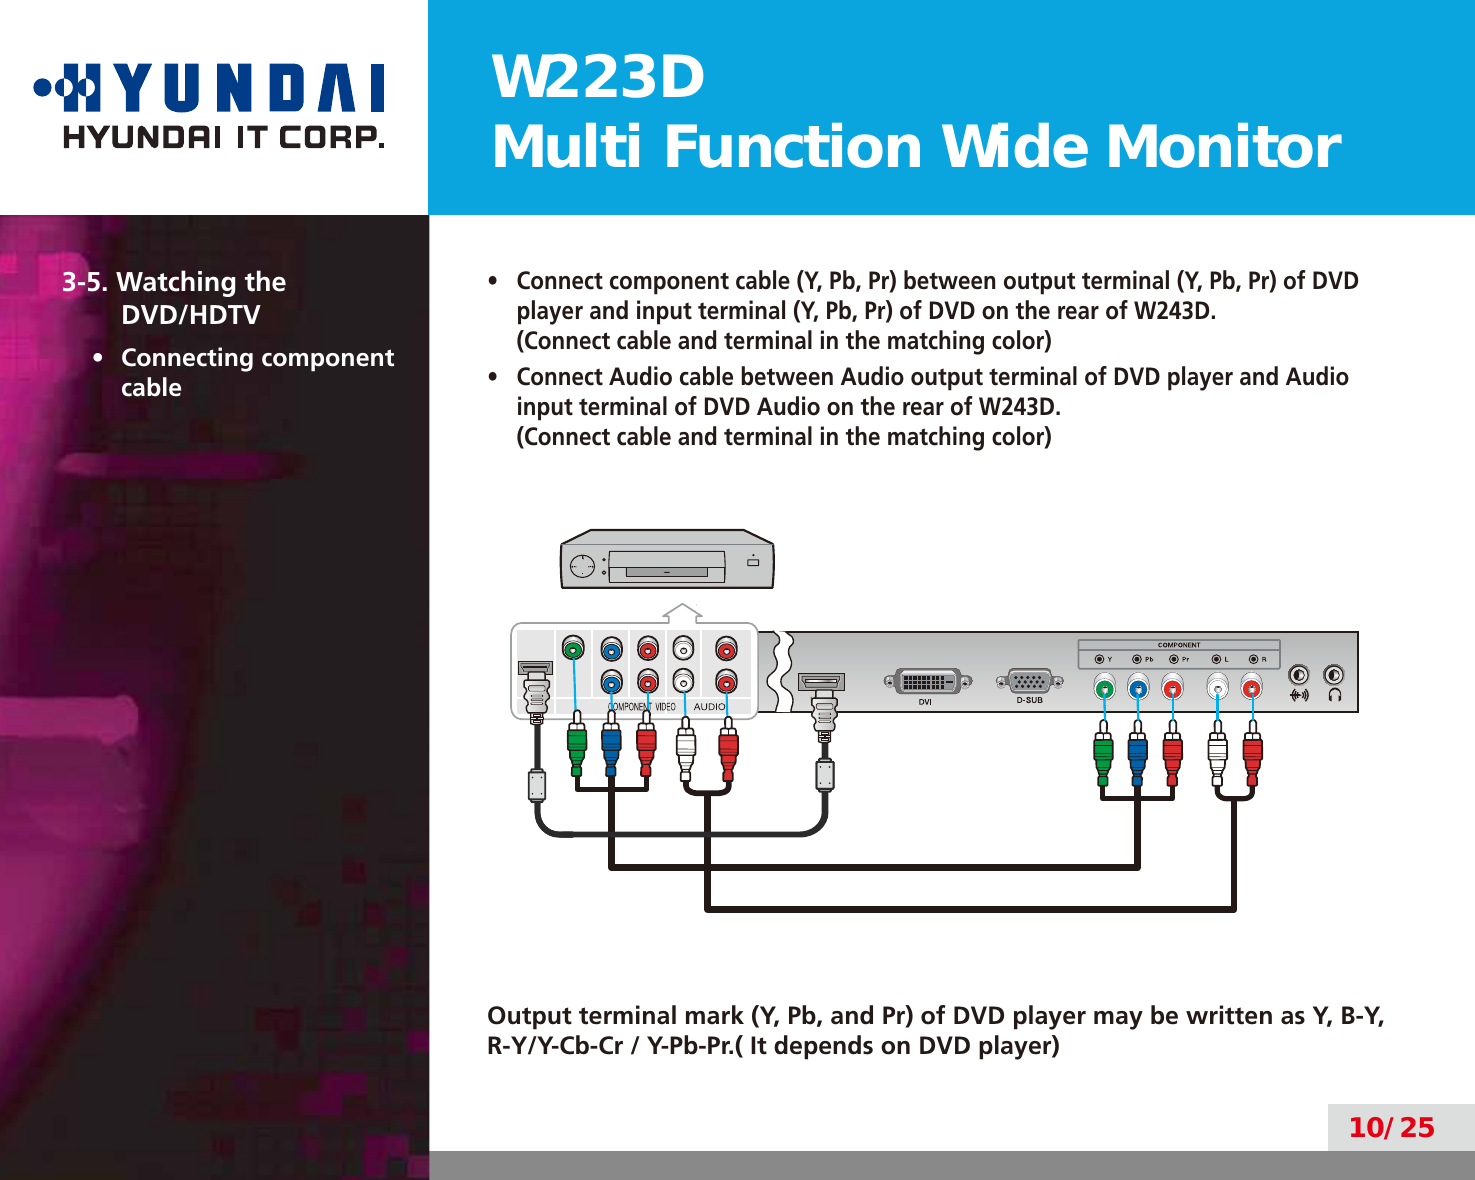 W223DMulti Function Wide Monitor10/253-5. Watching the  DVD/HDTV•  Connecting component cable•  Connect component cable (Y, Pb, Pr) between output terminal (Y, Pb, Pr) of DVD player and input terminal (Y, Pb, Pr) of DVD on the rear of W243D.  (Connect cable and terminal in the matching color)•  Connect Audio cable between Audio output terminal of DVD player and Audio input terminal of DVD Audio on the rear of W243D.  (Connect cable and terminal in the matching color)Output terminal mark (Y, Pb, and Pr) of DVD player may be written as Y, B-Y, R-Y/Y-Cb-Cr / Y-Pb-Pr.( It depends on DVD player)